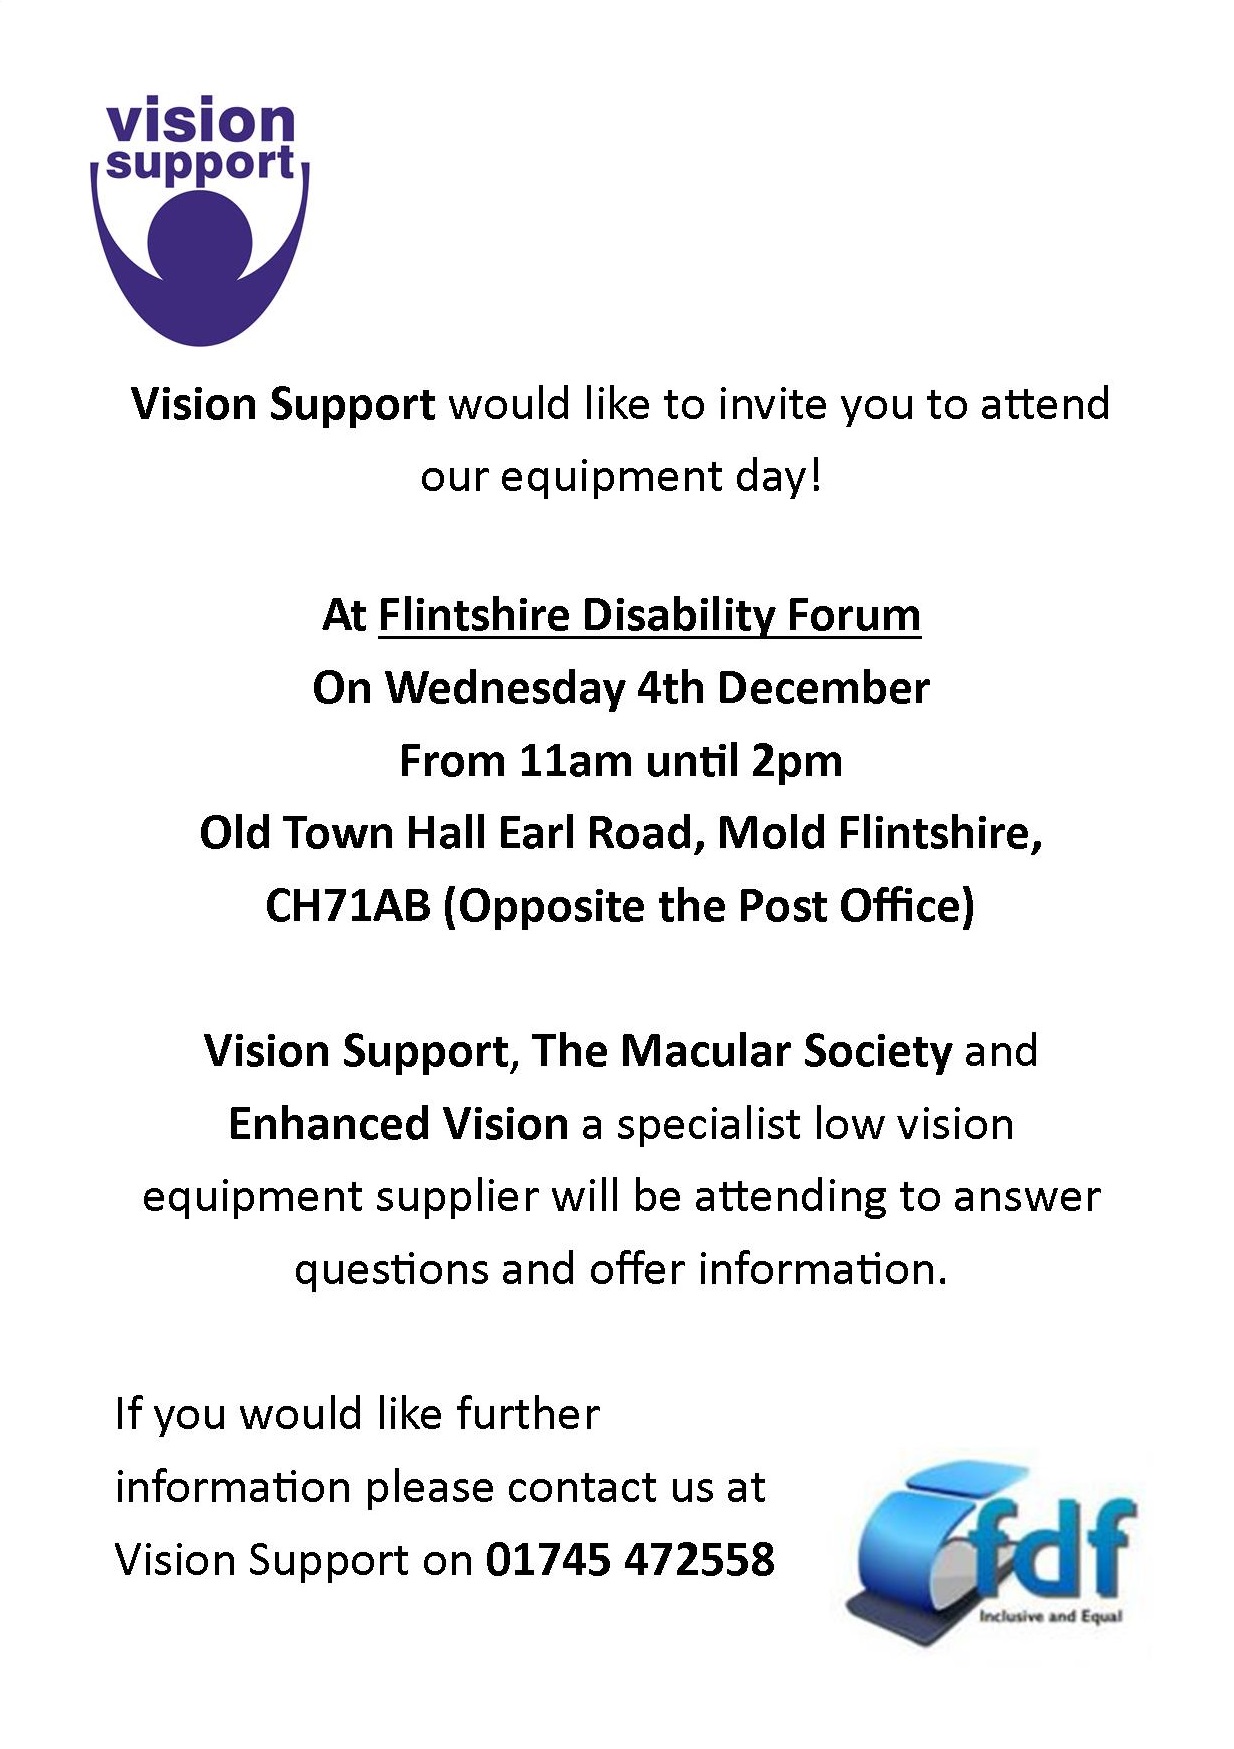 Poster for Flintshire Disability Forum technology day event on Wednesday 4th December, from 11am til 2pm